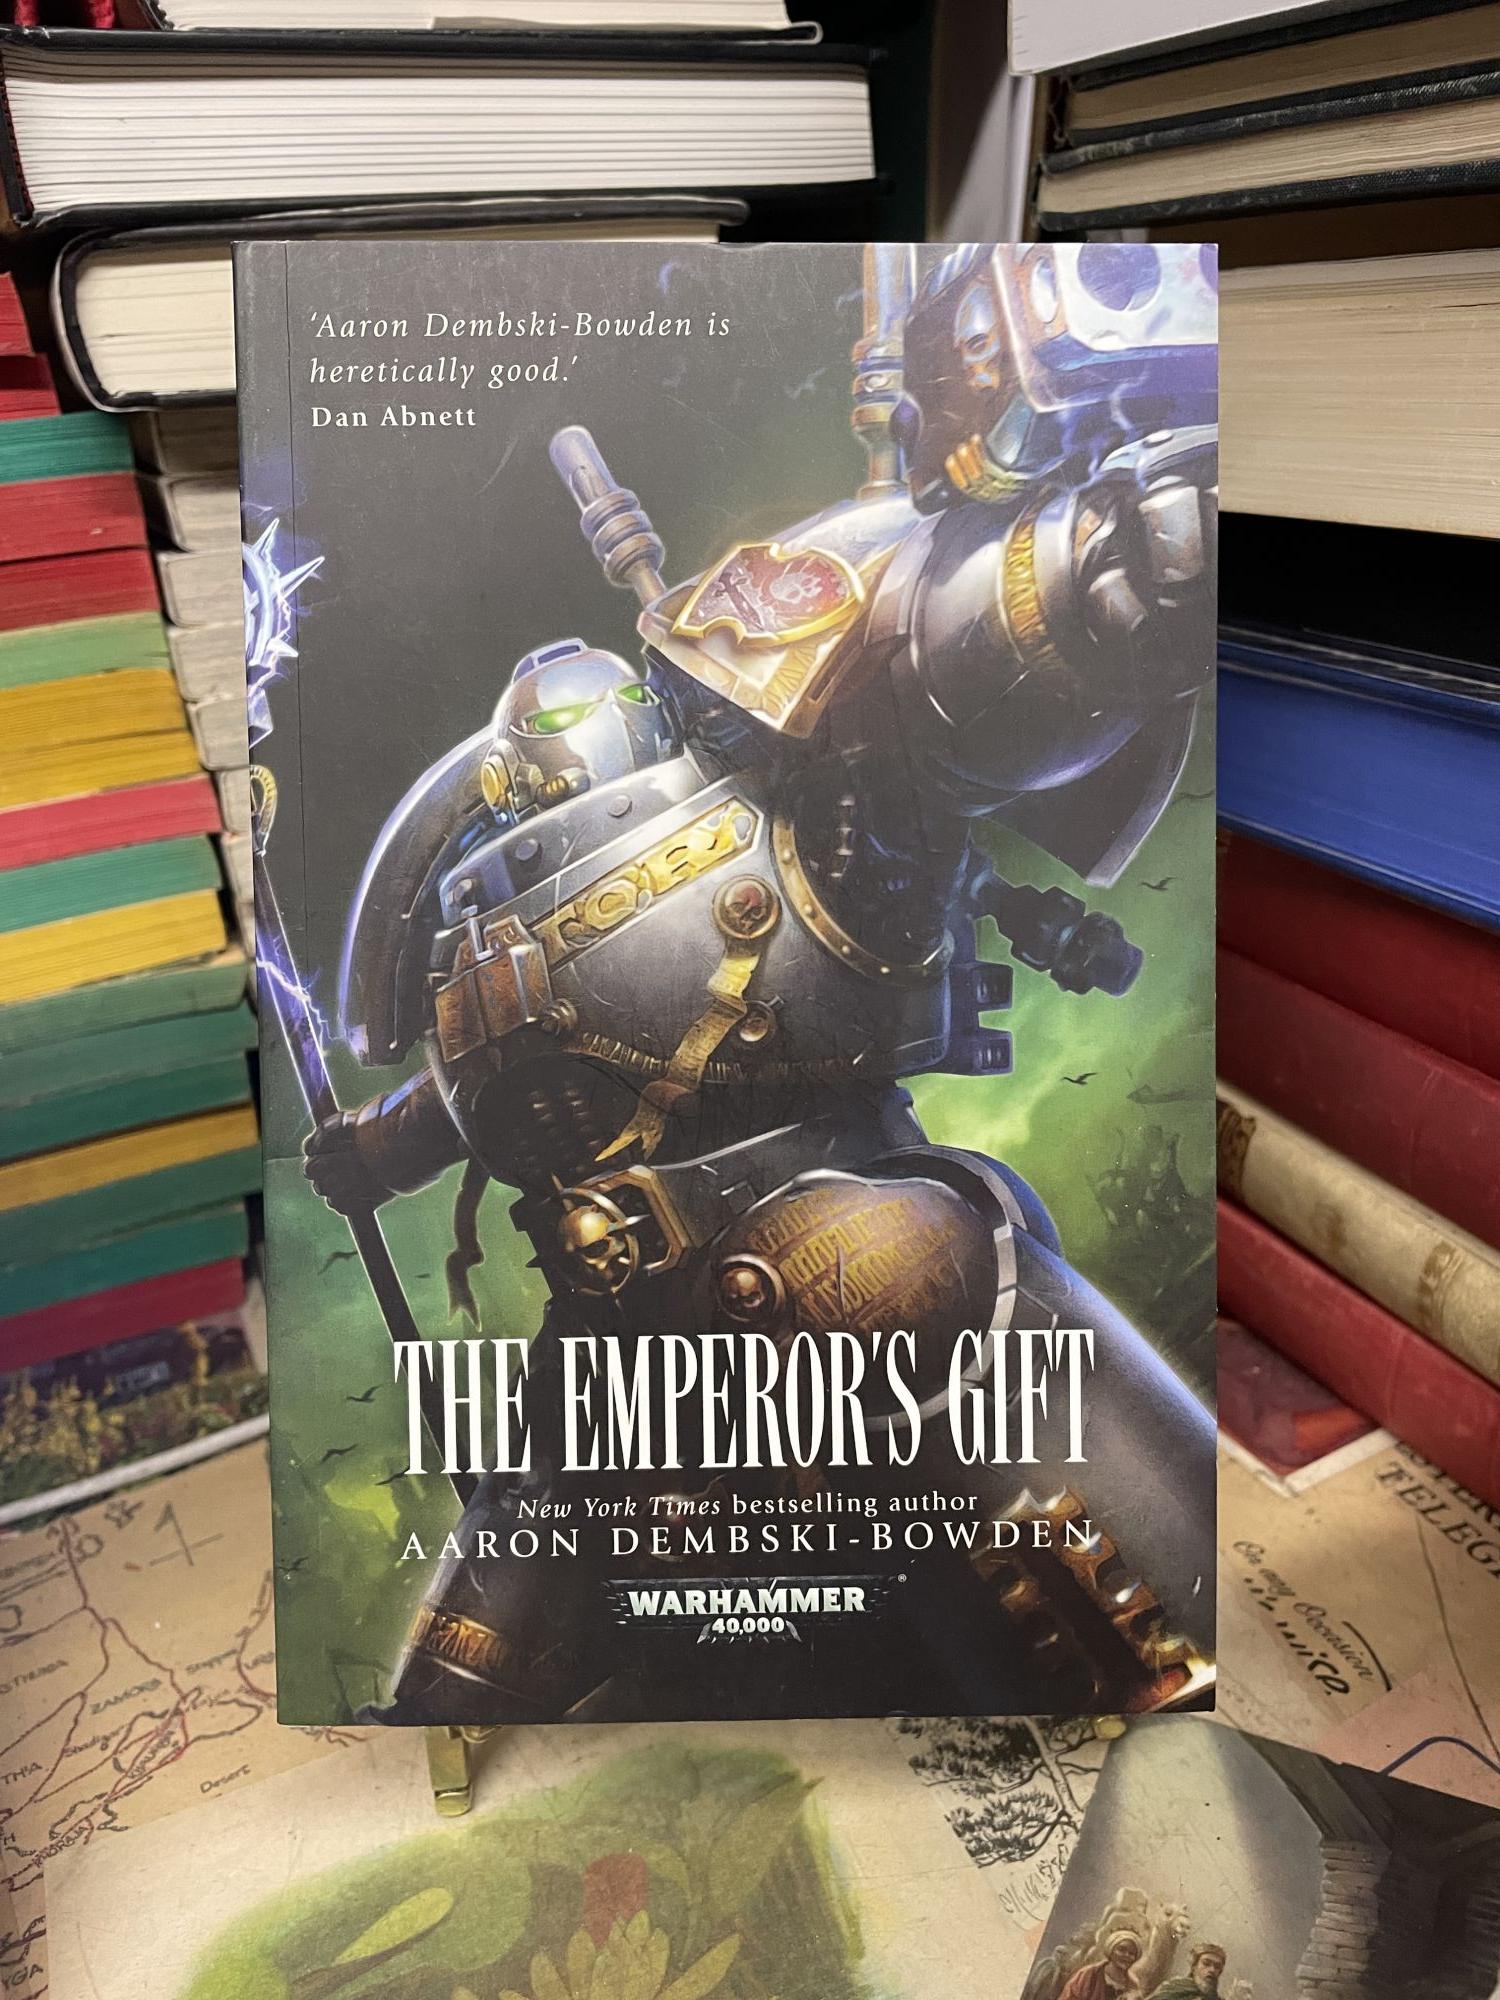 The Emperor's Gift by Aaron Dembski-Bowden (Book Review